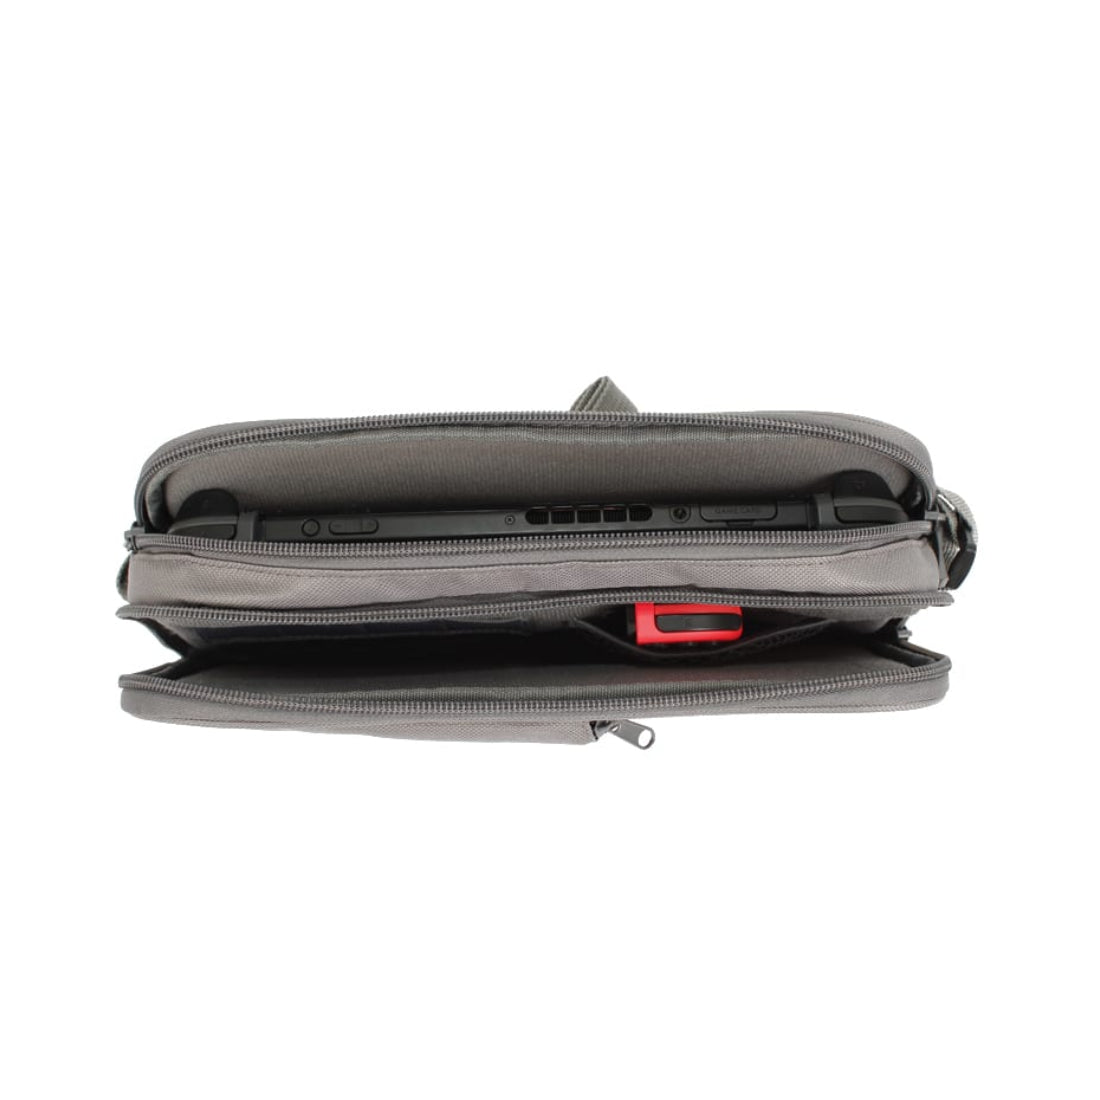 Sparkfox Travel Bag with Game & SD Slots For Nintendo Switch - Store 974 | ستور ٩٧٤